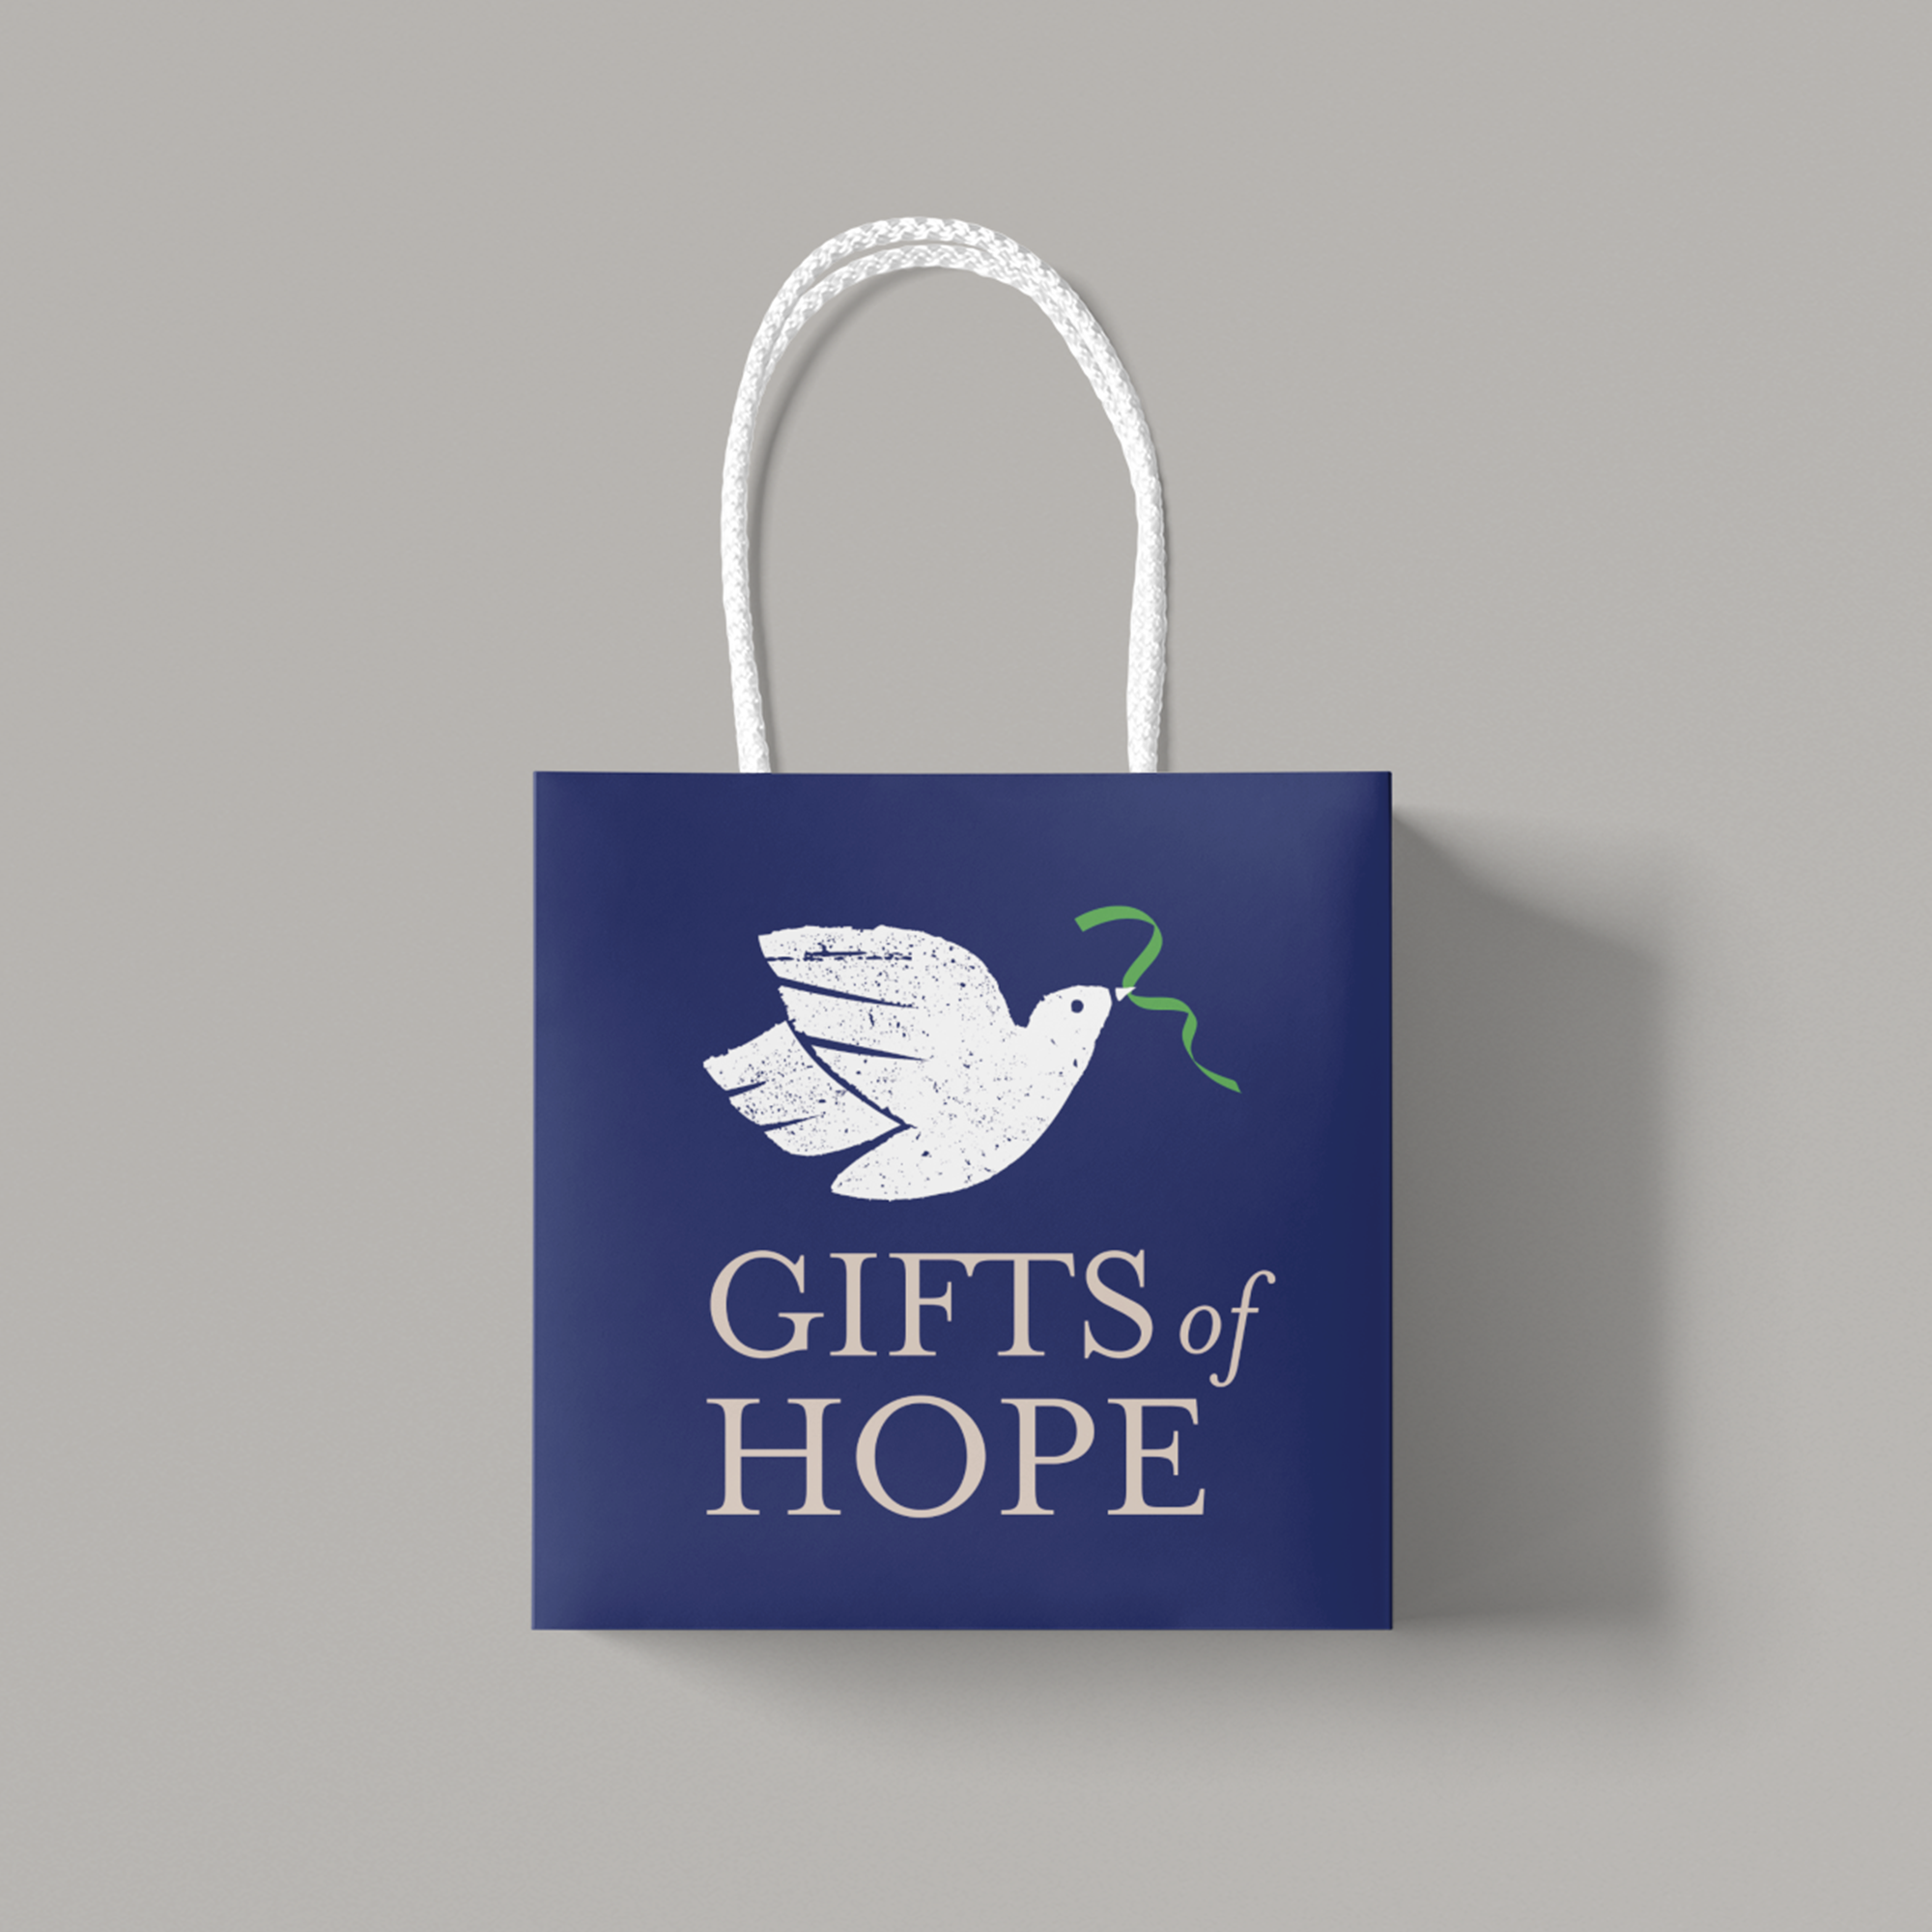 Gifts of Hope brand logo